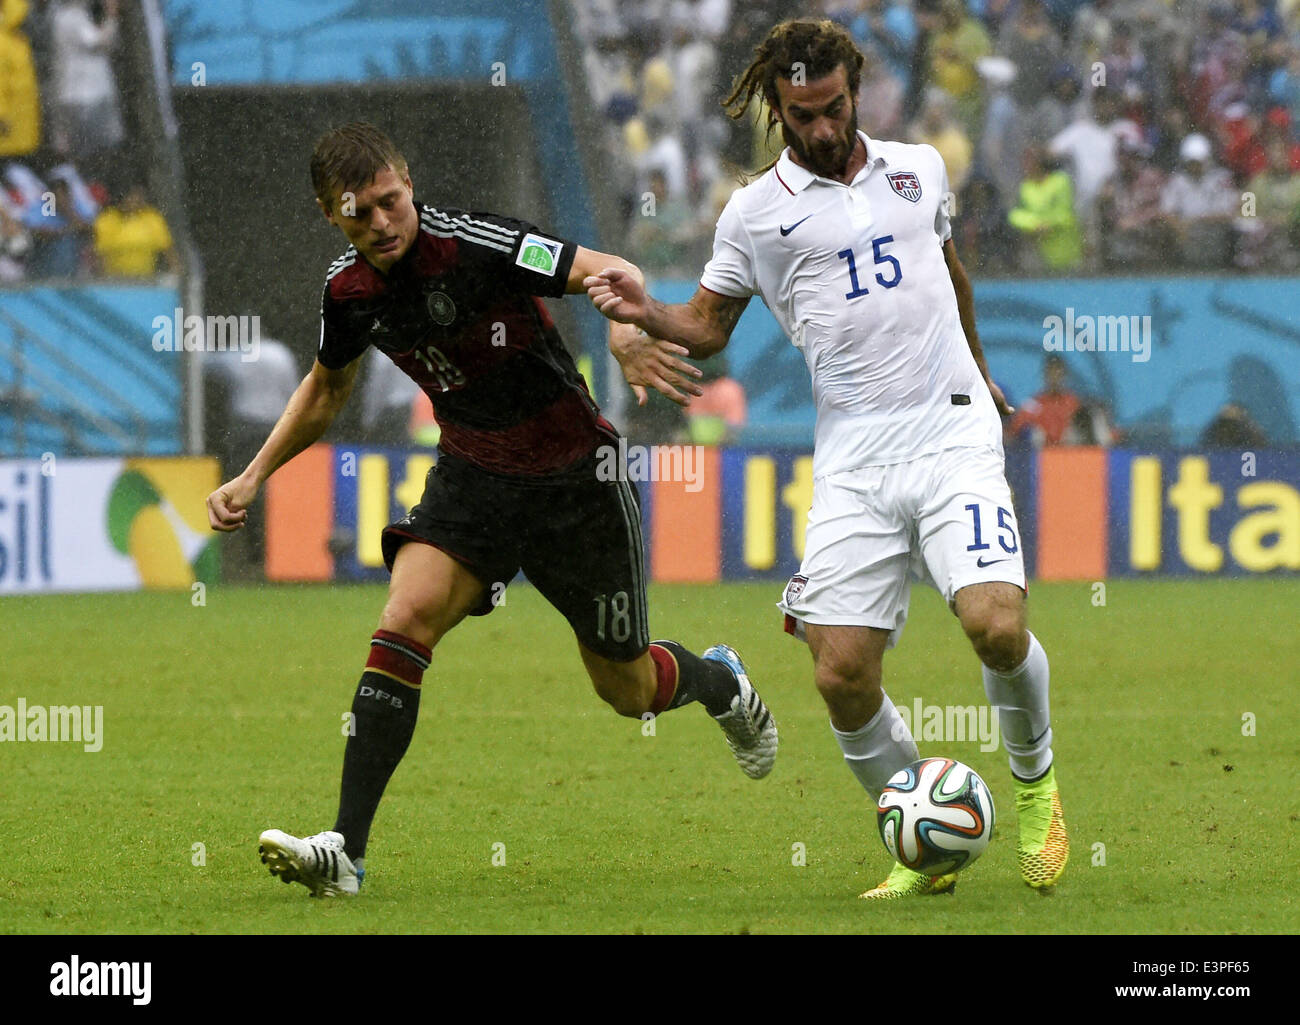 Recife, Brazil. 26th June, 2014. Germany's Toni Kroos (L) vies with Kyle Beckerman of the U.S. during a Group G match between the U.S. and Germany of 2014 FIFA World Cup at the Arena Pernambuco Stadium in Recife, Brazil, on June 26, 2014. Germany won 1-0 over the U.S. on Thursday. Germany and the U.S. enter Round of 16 from Group G. Credit:  Lui Siu Wai/Xinhua/Alamy Live News Stock Photo